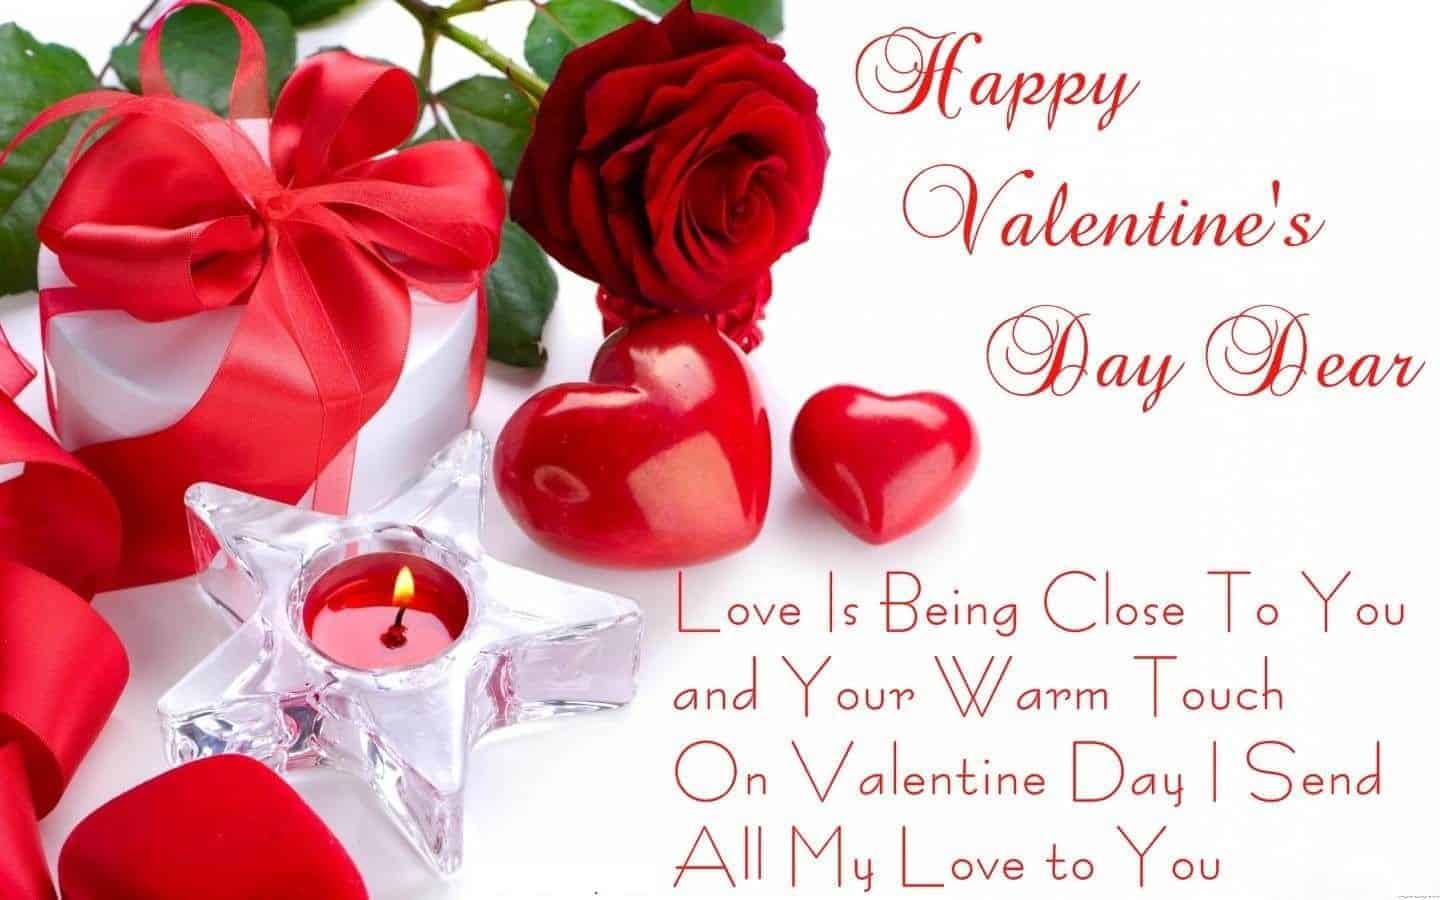 Sweet Romantic Fb Whatsapp Status Text SMS Message Quotes For Valentine Day 2015 Romantic Picture Message Cute Greeting s Quotes Text SMS Msg 20